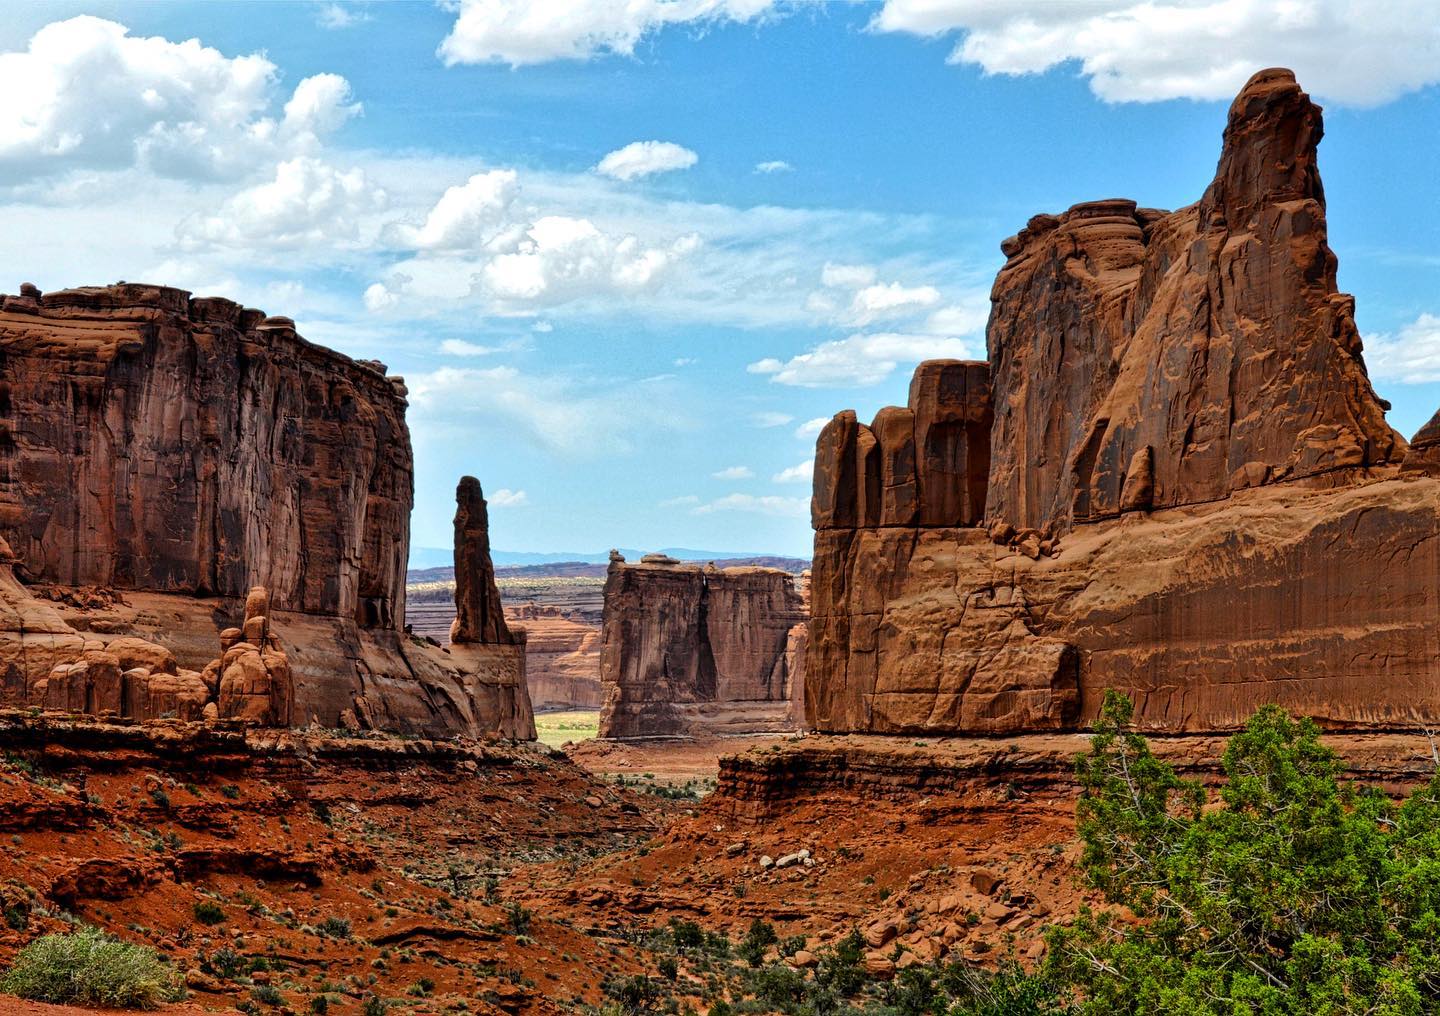 Arches NP, Utah
Park Avenue view. From the parking lot a paved walkway heads  to the Park Avenue viewpoint. From there, there is a well-worn trail that heads down the Avenue.

#usa #us #usatrip #usatravel #usatravels #usareisen #usaroadtrip #traveling #travelinspiration #travelandleisure #travelawesome #naturephotography #travelpics #utahunique #utah #archesnationalpark #archesnps #nature_perfection #hikingadventures #passiontravel #america #beautifulnature #redrocks #natureshots #usaurlaub #travelblogger #usablogger #picoftheday #exploremore #explore